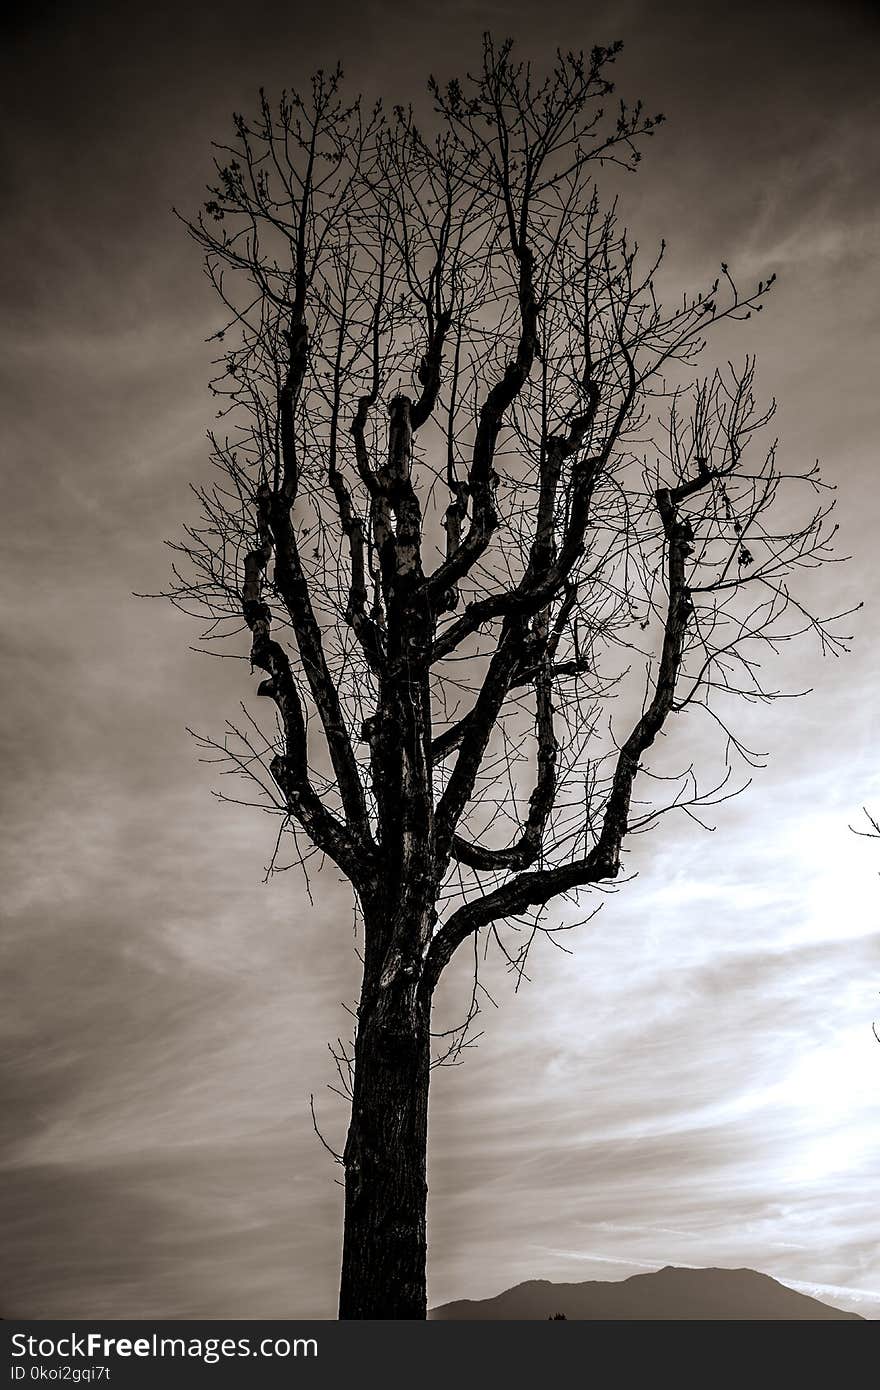 This black and white photo of a dying tree was taken in the foothills of southern california. This black and white photo of a dying tree was taken in the foothills of southern california